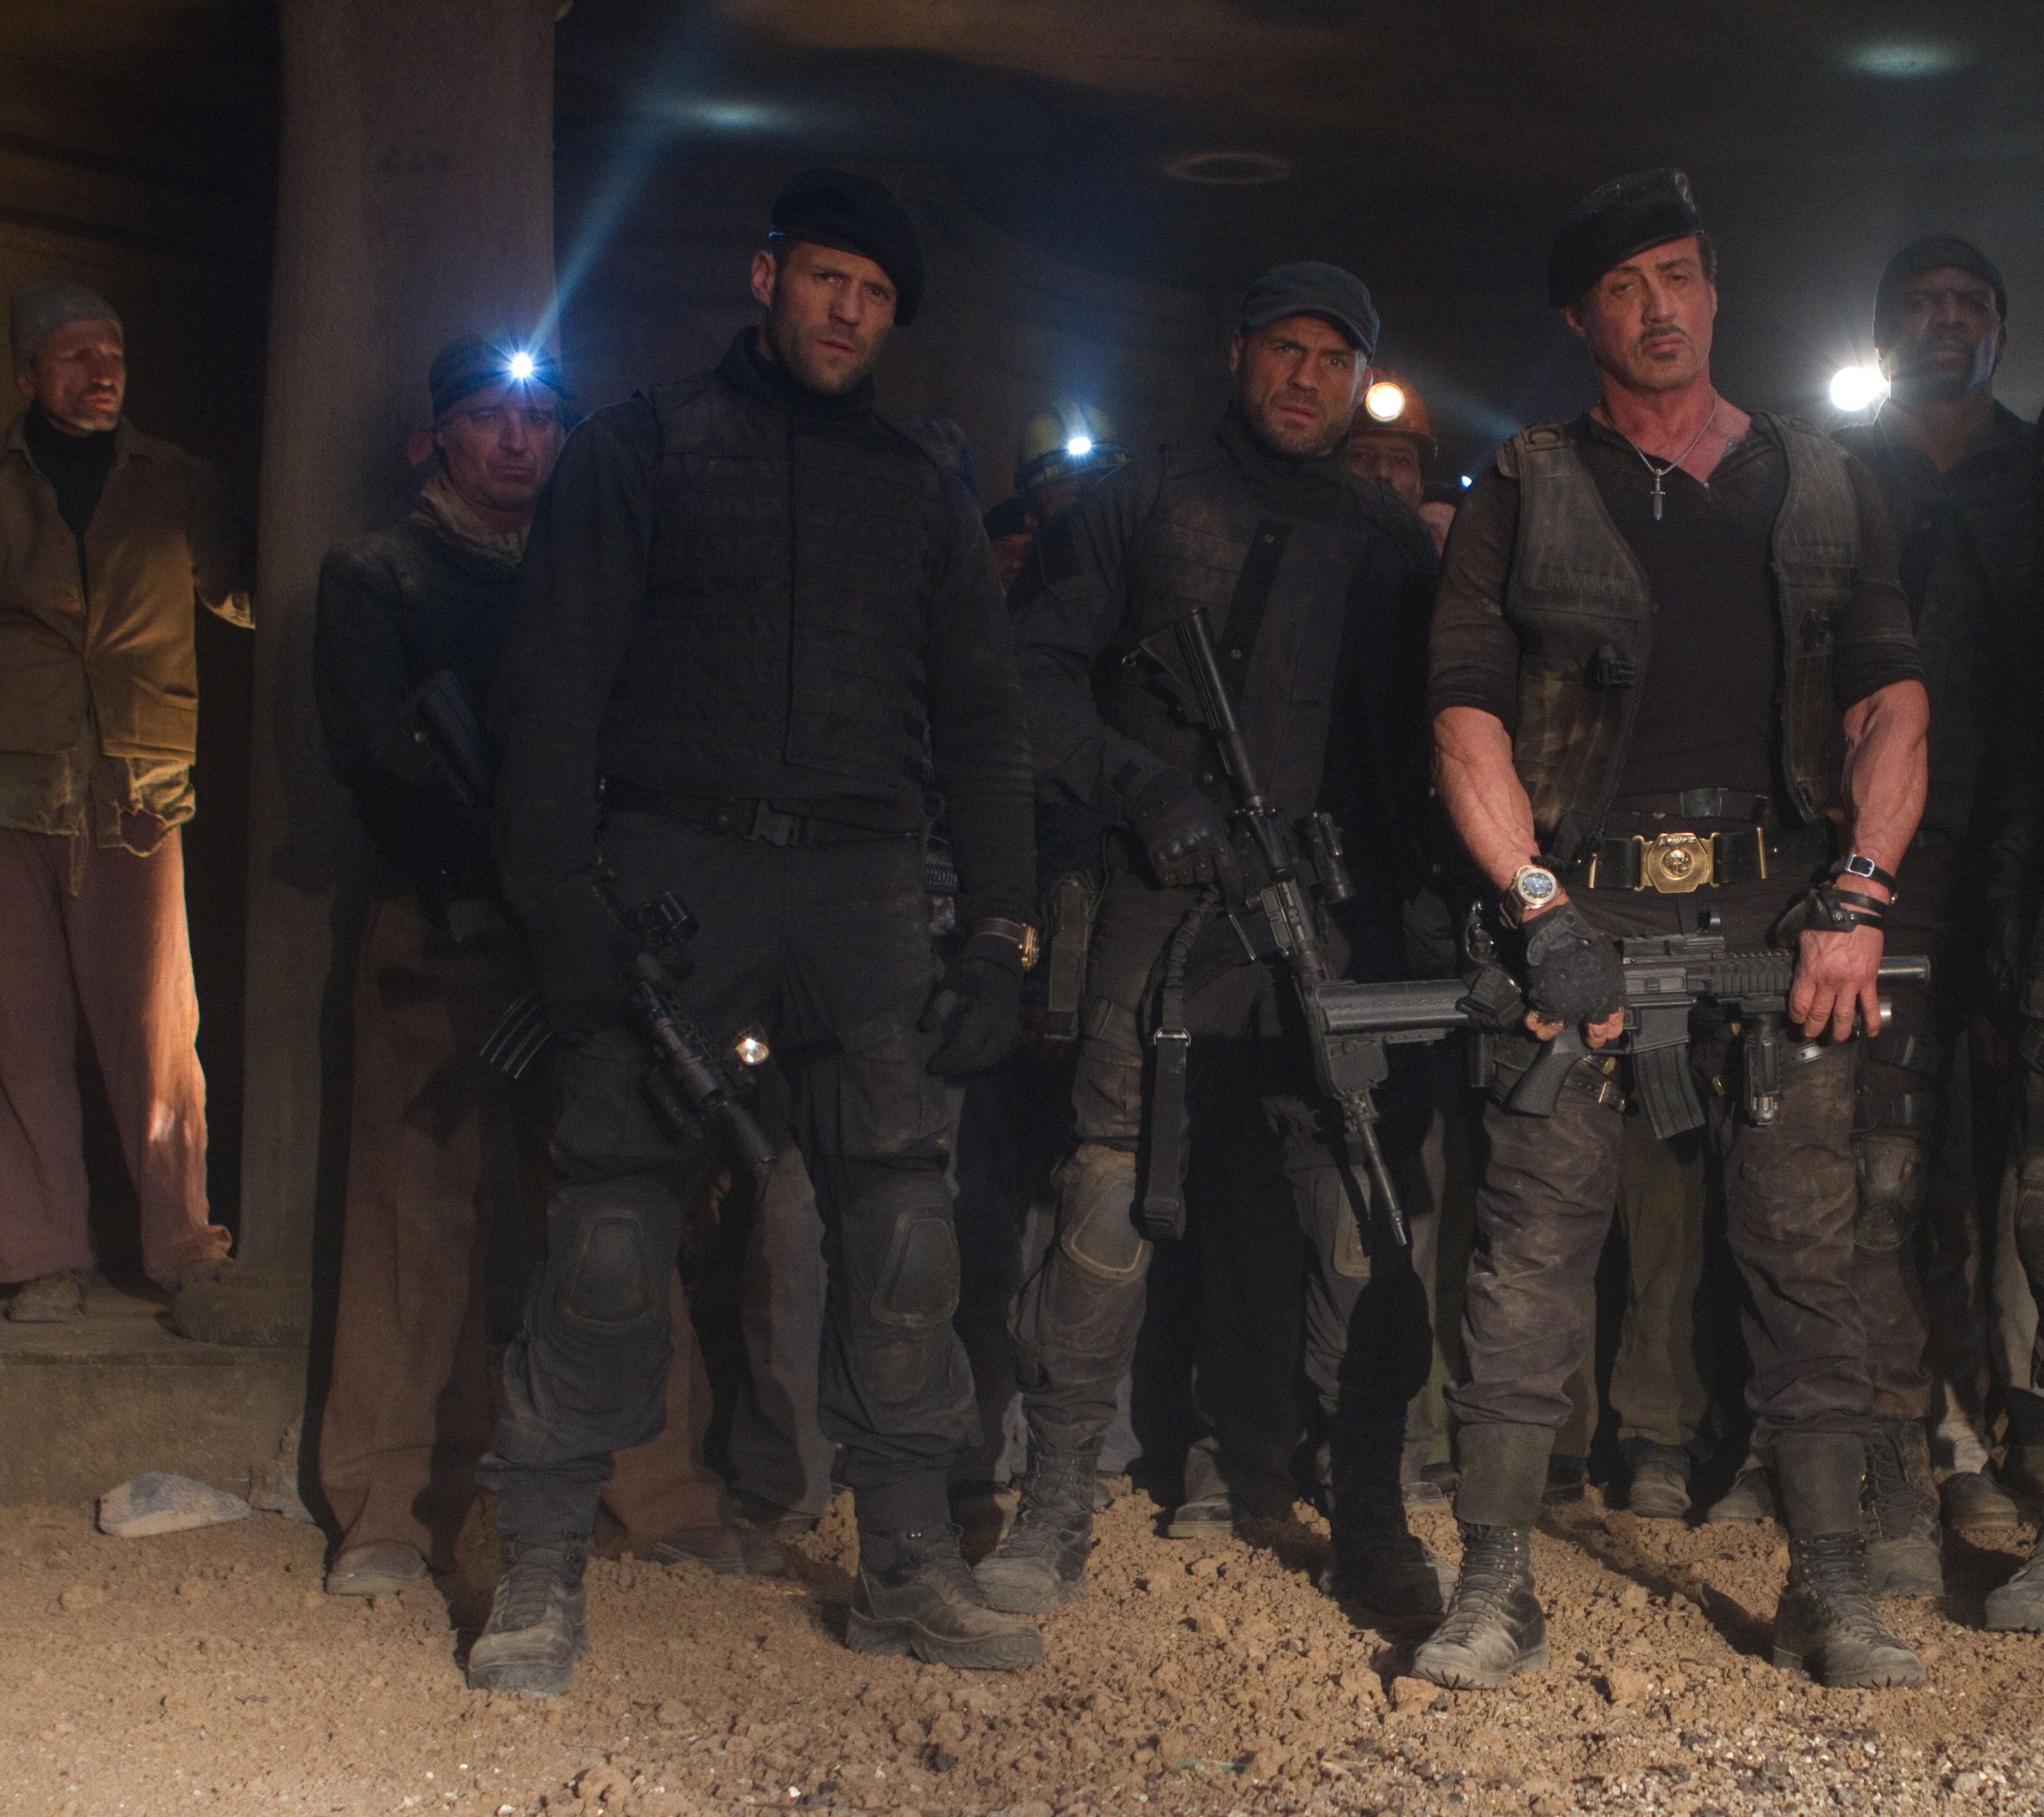 movie, the expendables 2, randy couture, sylvester stallone, dolph lundgren, jason statham, terry crews, hale caesar, barney ross, lee christmas, gunnar jensen, toll road, nan yu, maggie (the expendables), the expendables Full HD